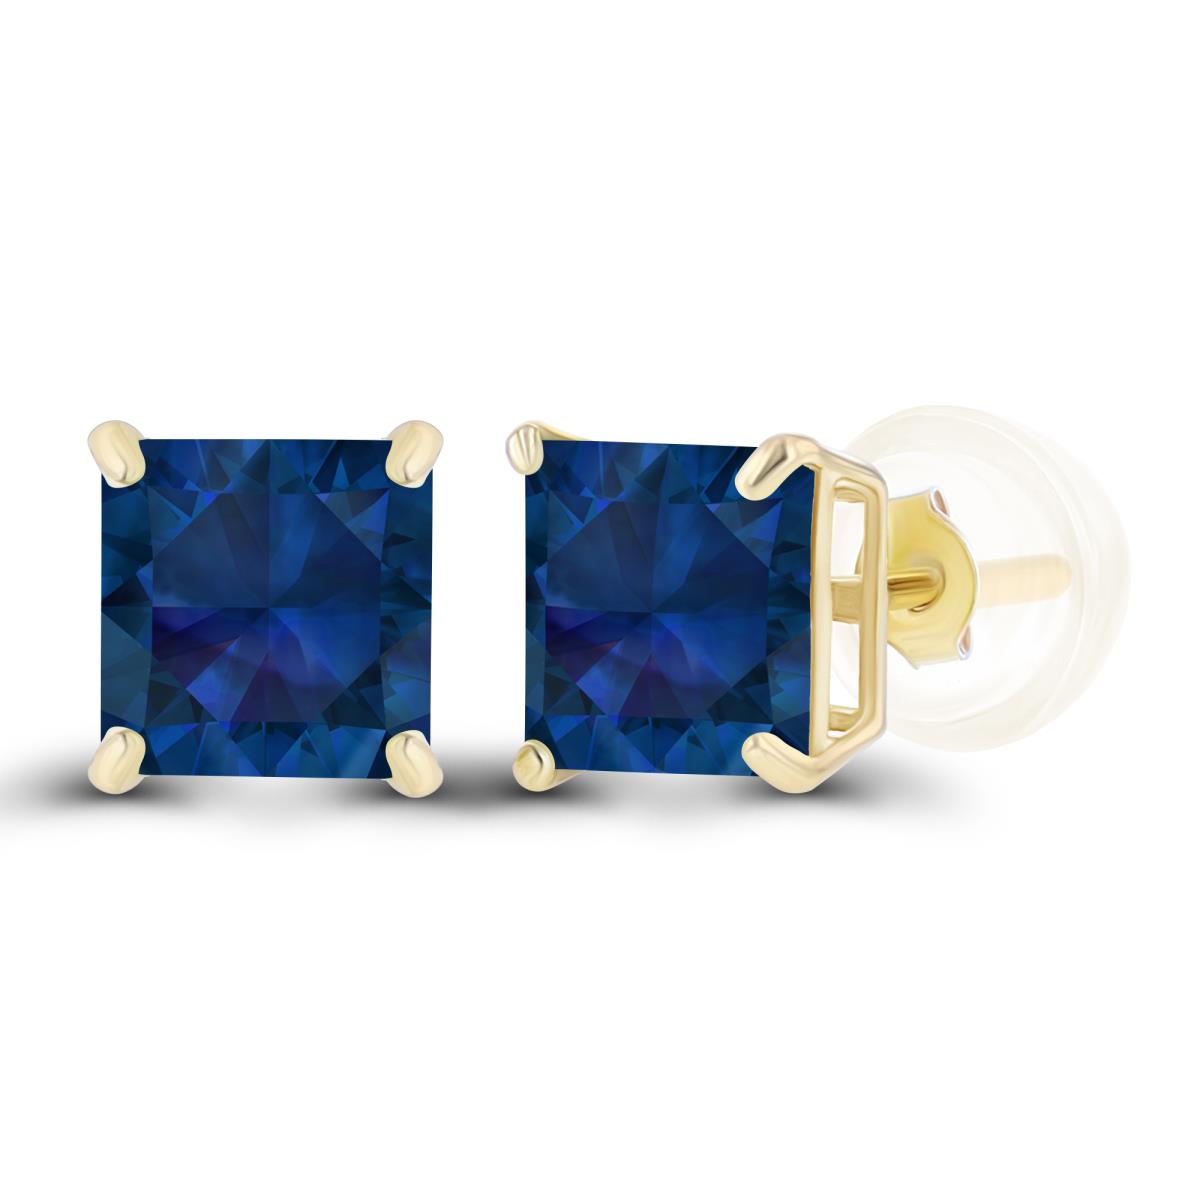 14K Yellow Gold 5mm Square Created Blue Sapphire Basket Stud Earrings